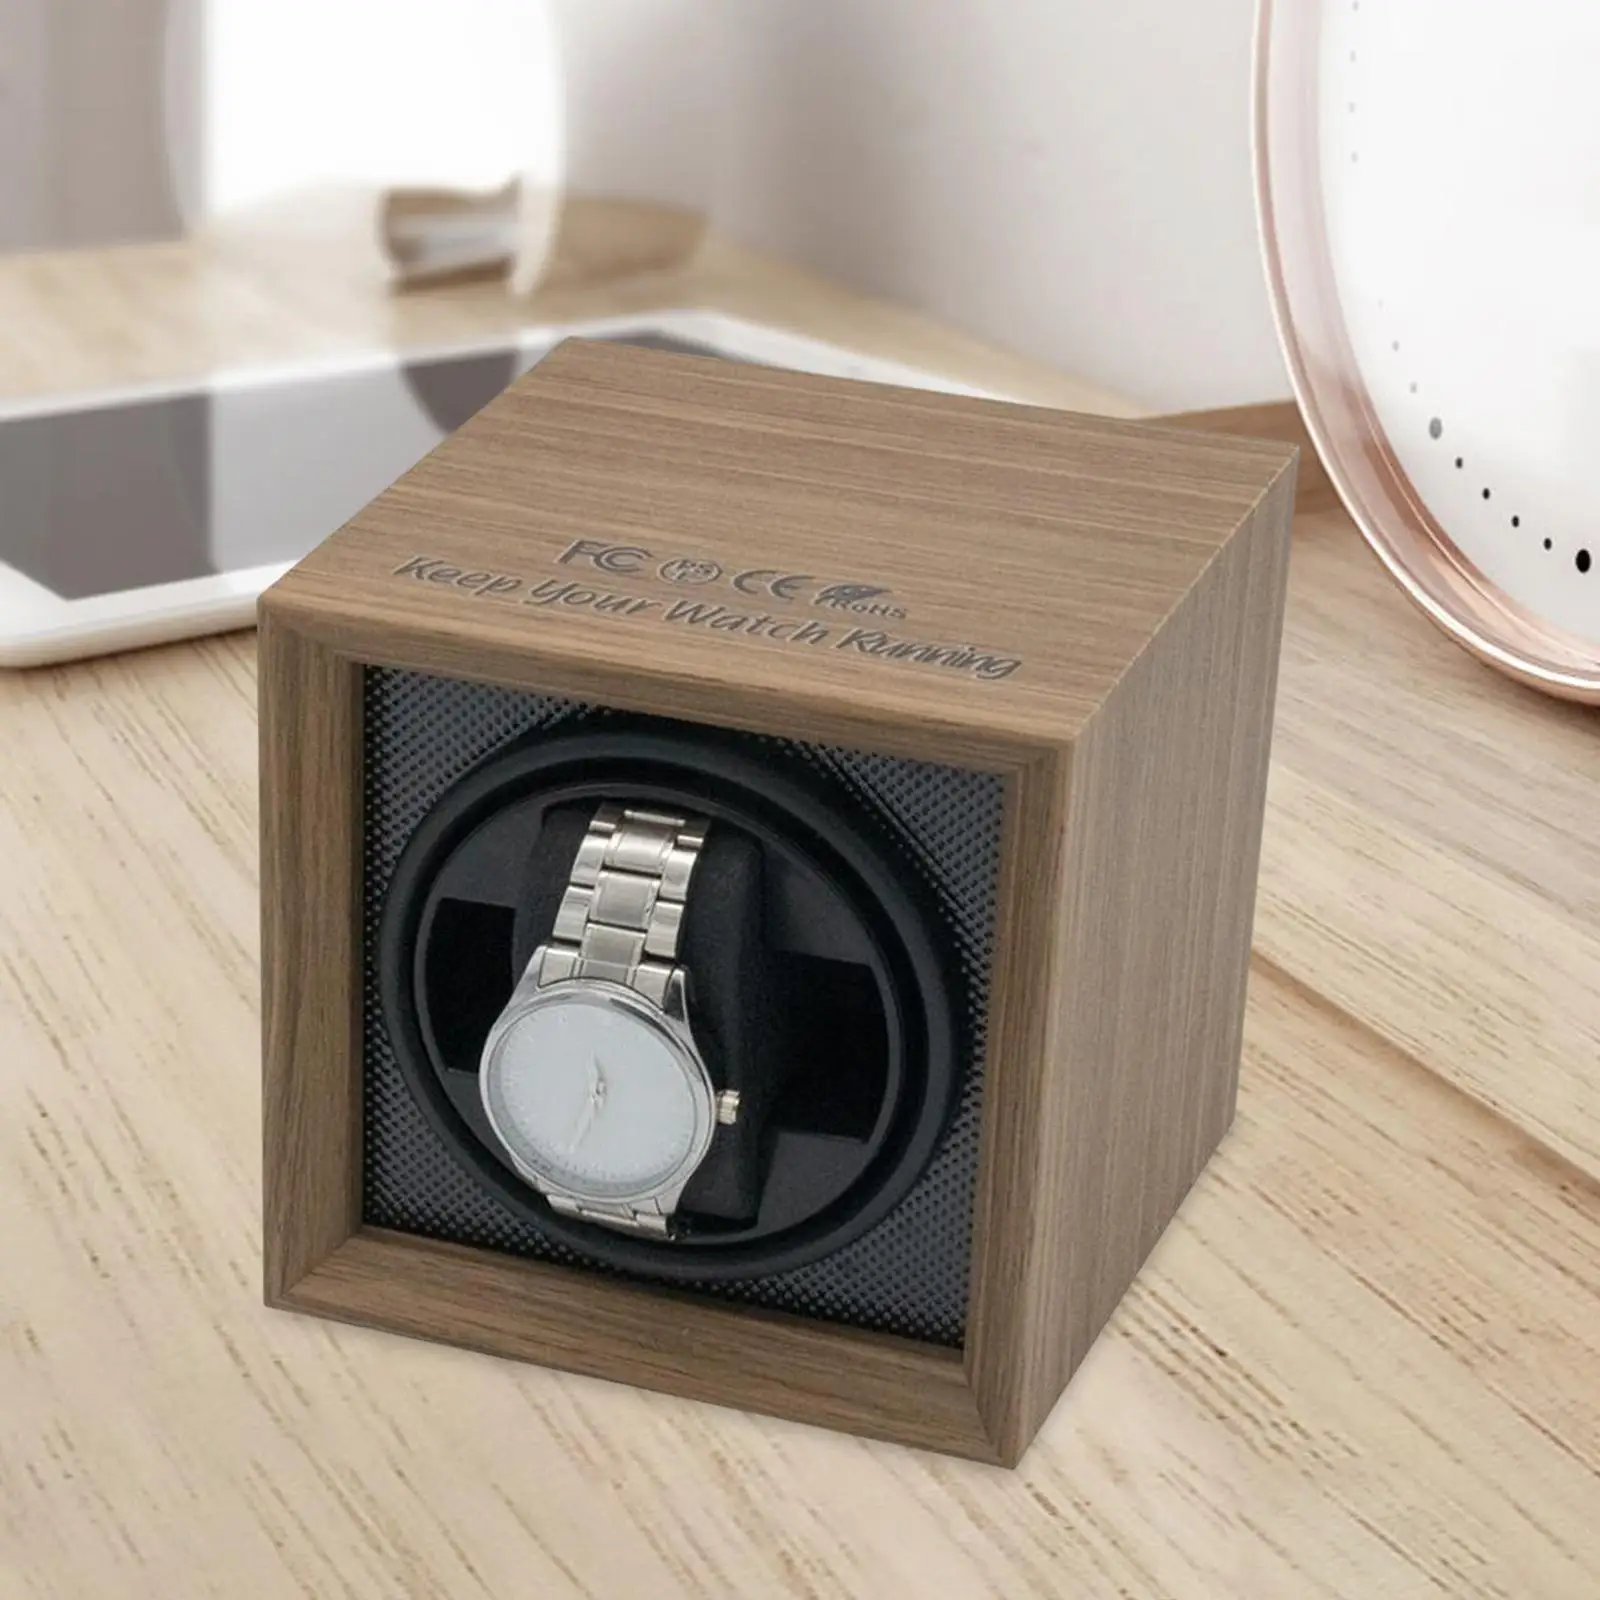 Luxury Automatic Single Watch Winder with Super Quiet Motor Display Box for Men and Women Watches